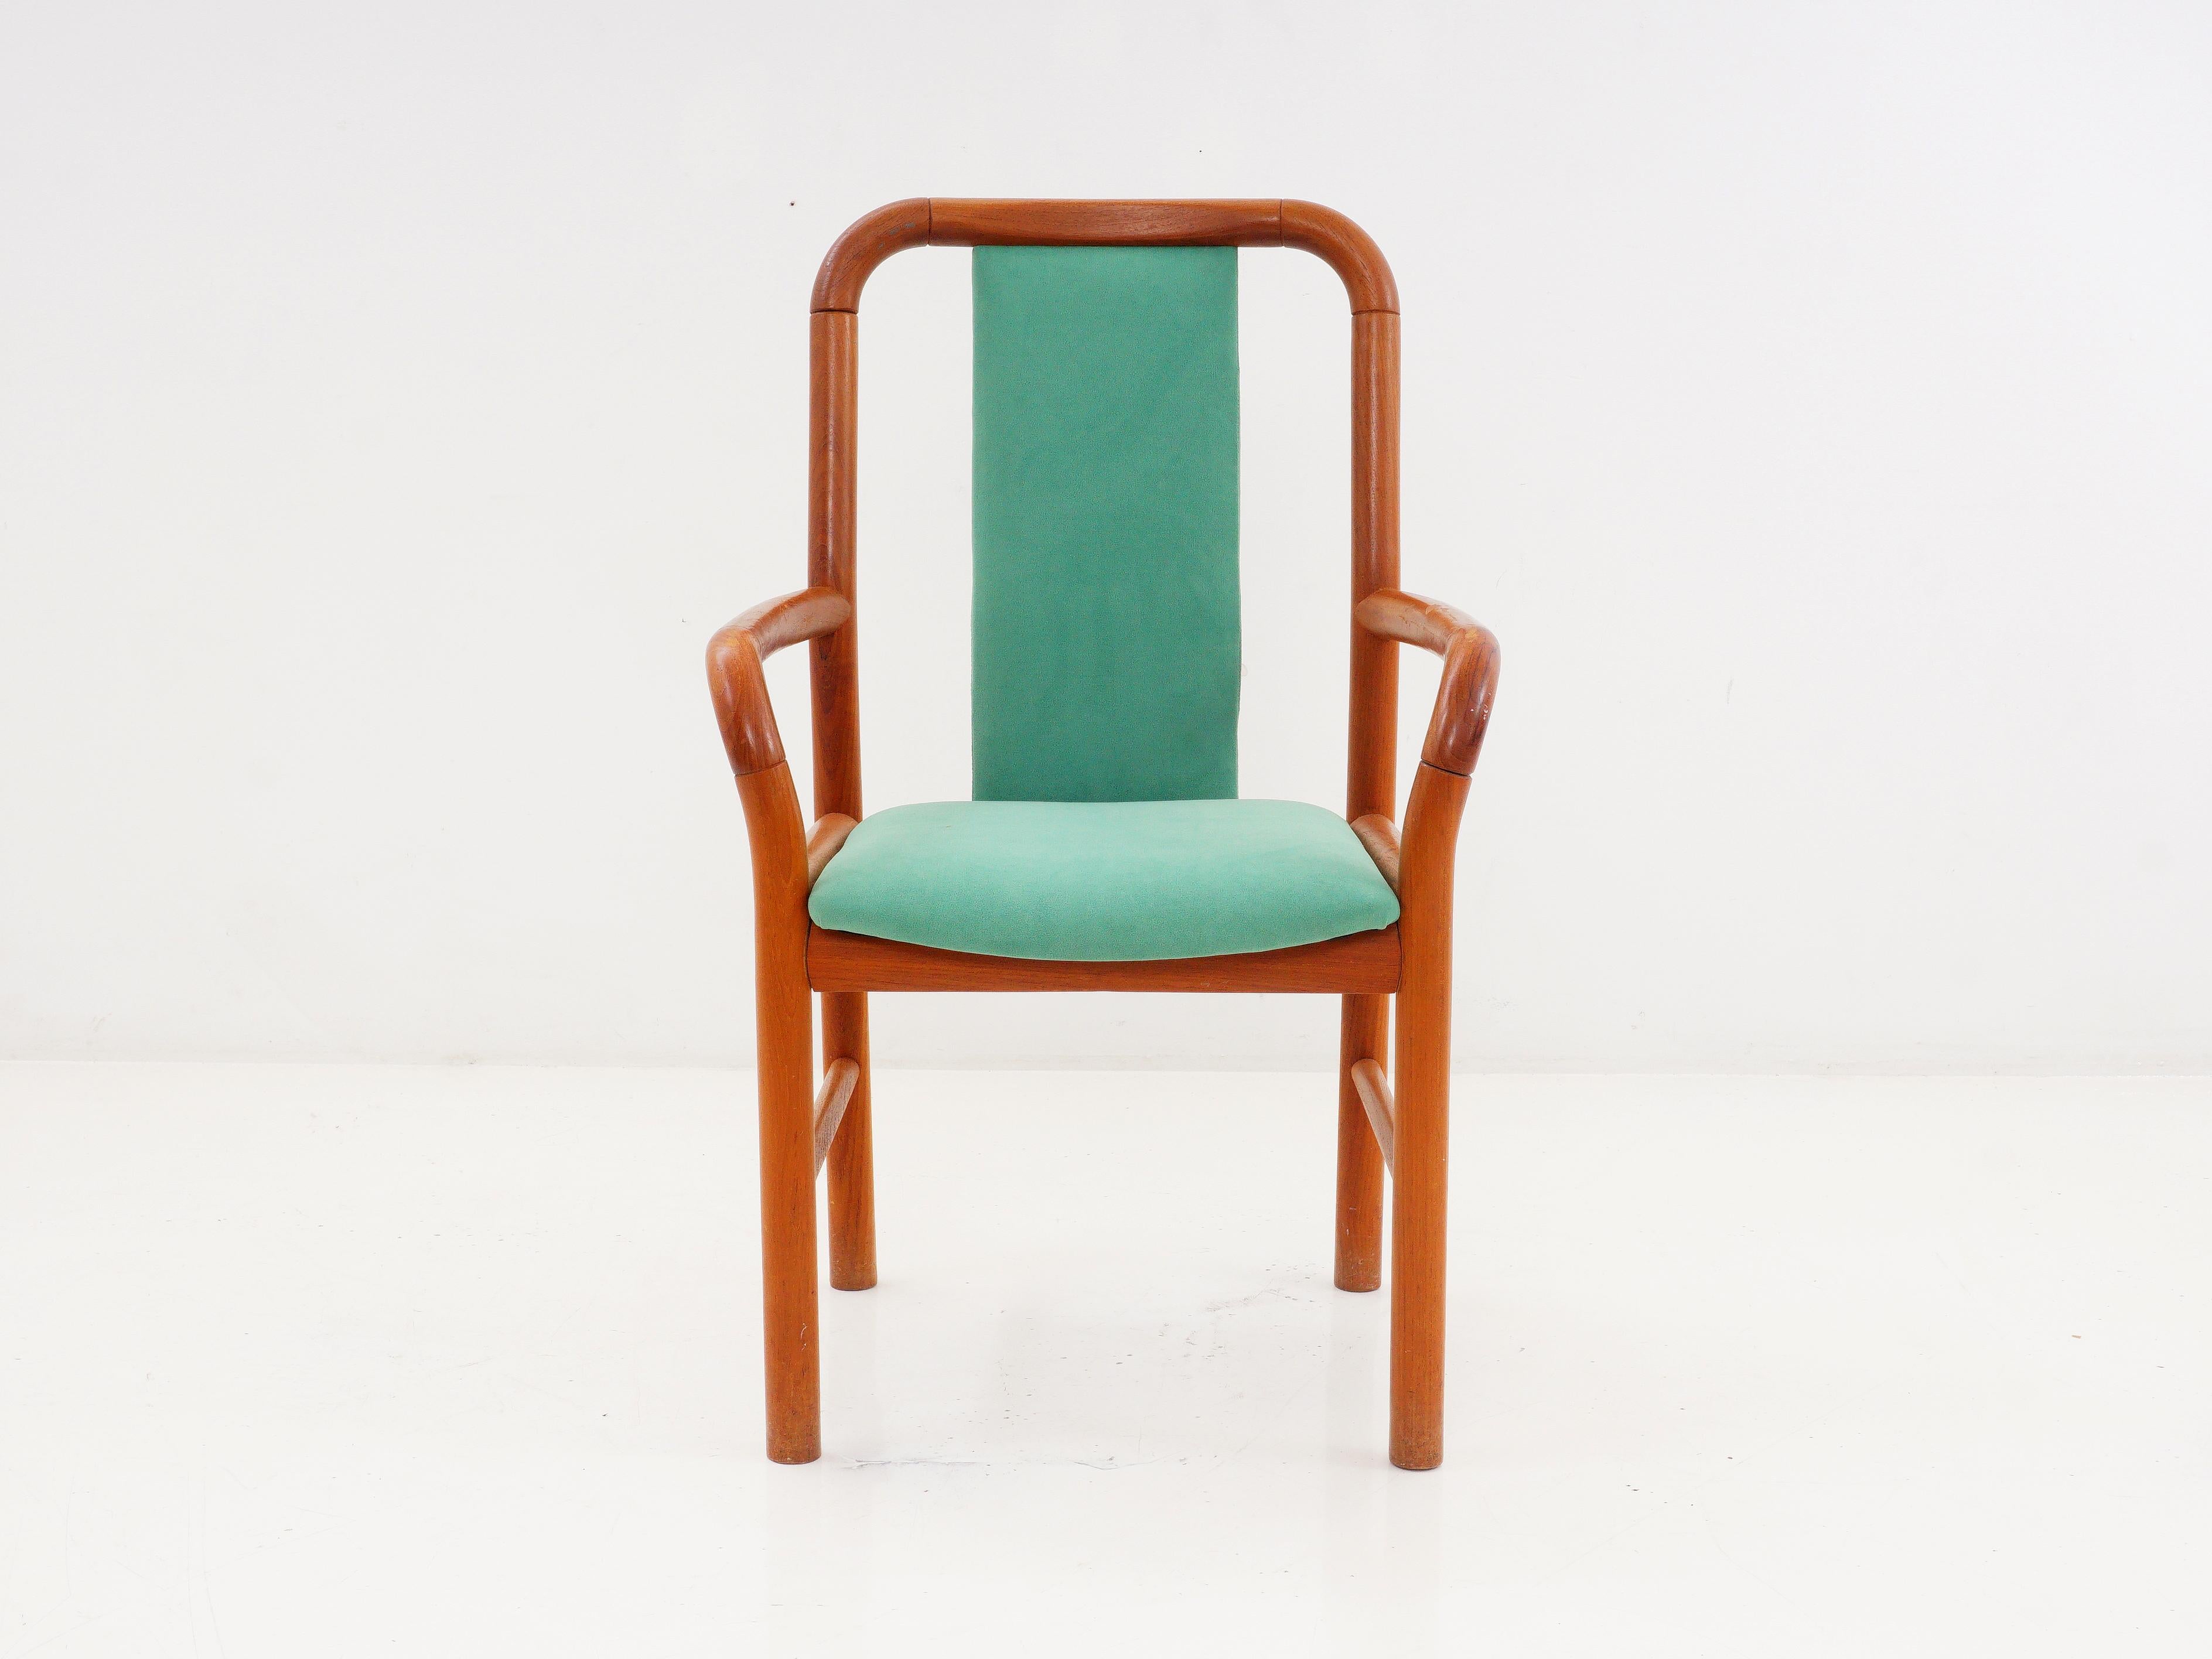 Midcentury Green Upholstered Dining Chairs, 1970s For Sale 3